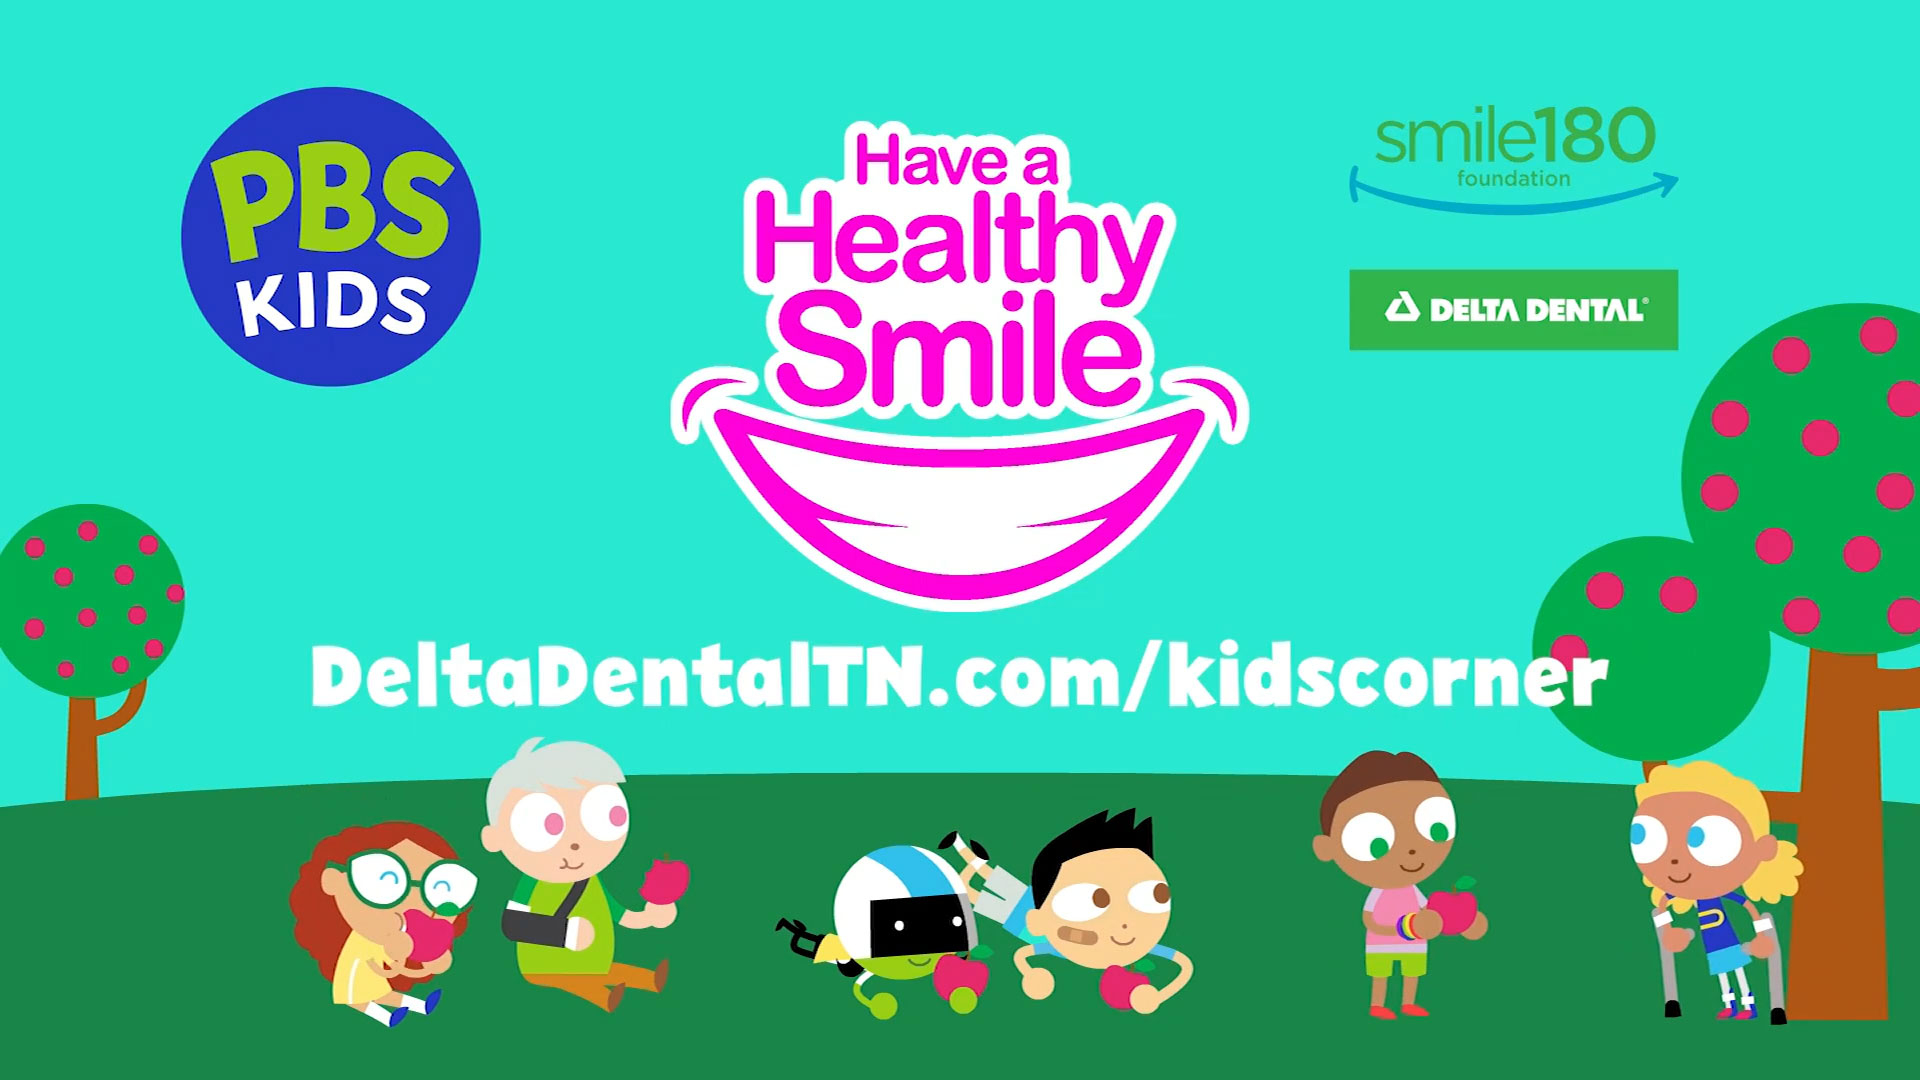 One of the Have a Healthy Smile campaign's public service announcements shares three tips for a healthy smile: eat plenty of crunchy fruits and vegetables, brush your teeth after eating sugary snacks or drinking sodas, and drink lots of water to wash away food particles.